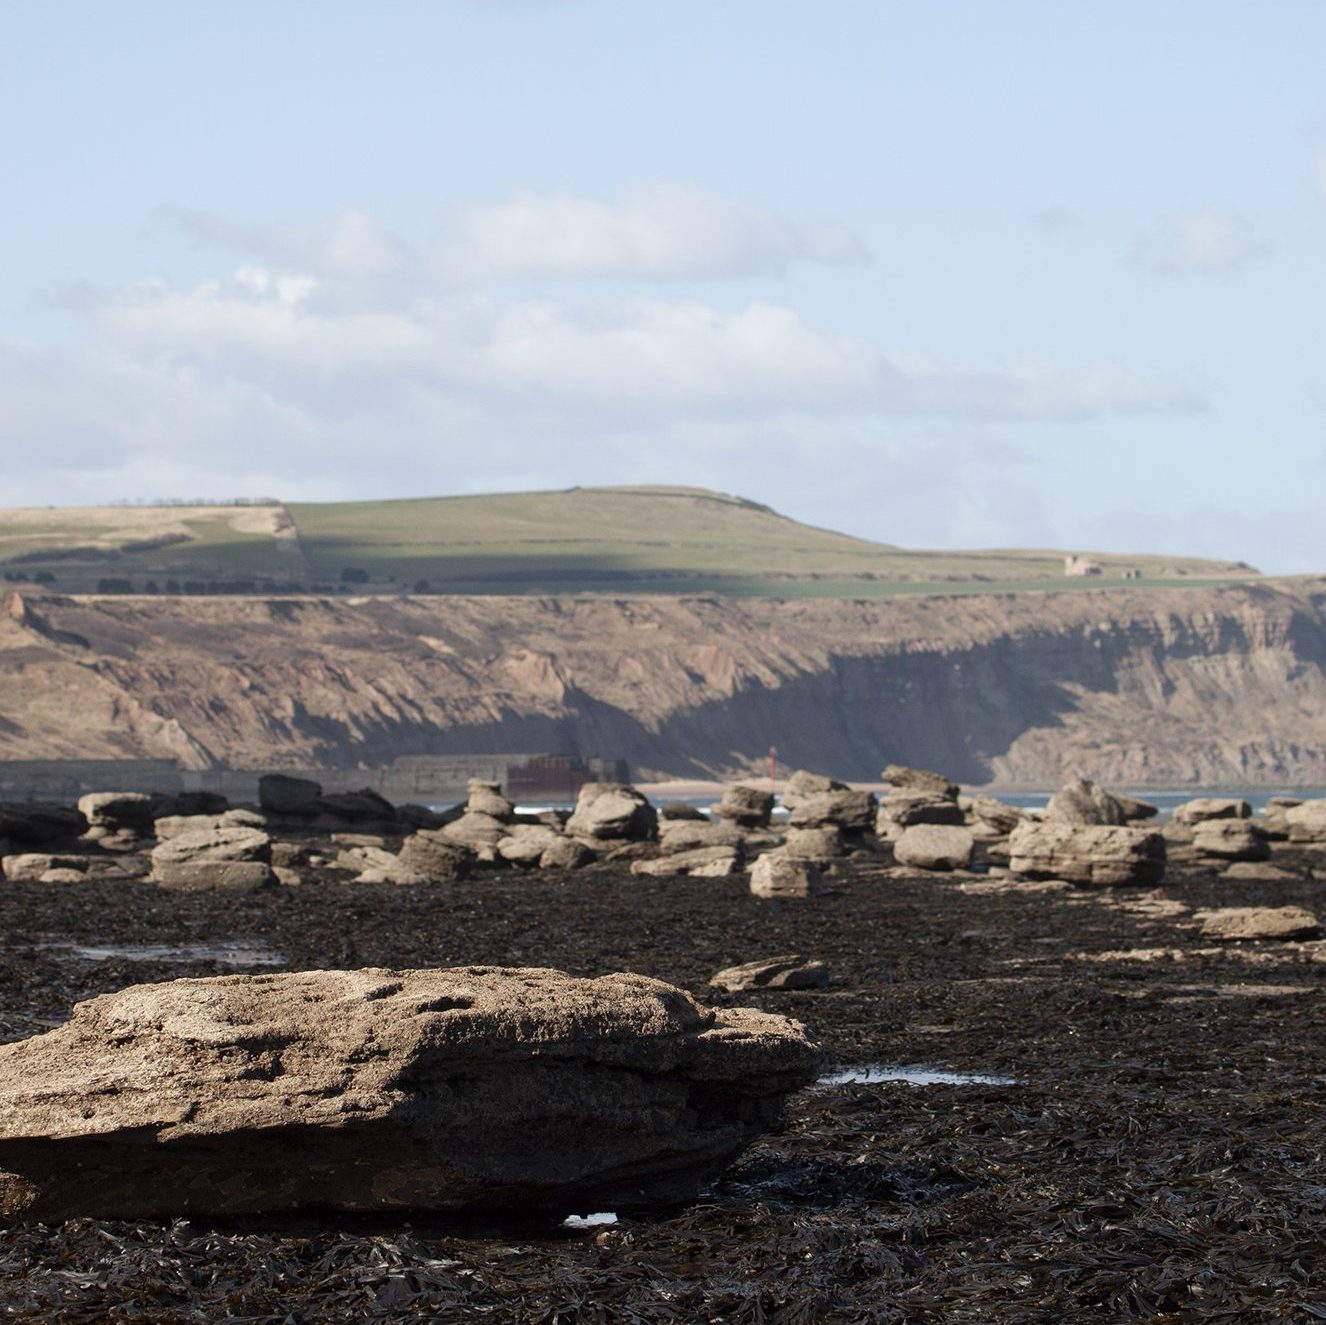 Photo of the foreshore at Hummersea. Large rocks emerge from an expanse of seaweed. The cliffs above Skinningrove are visible in the background.